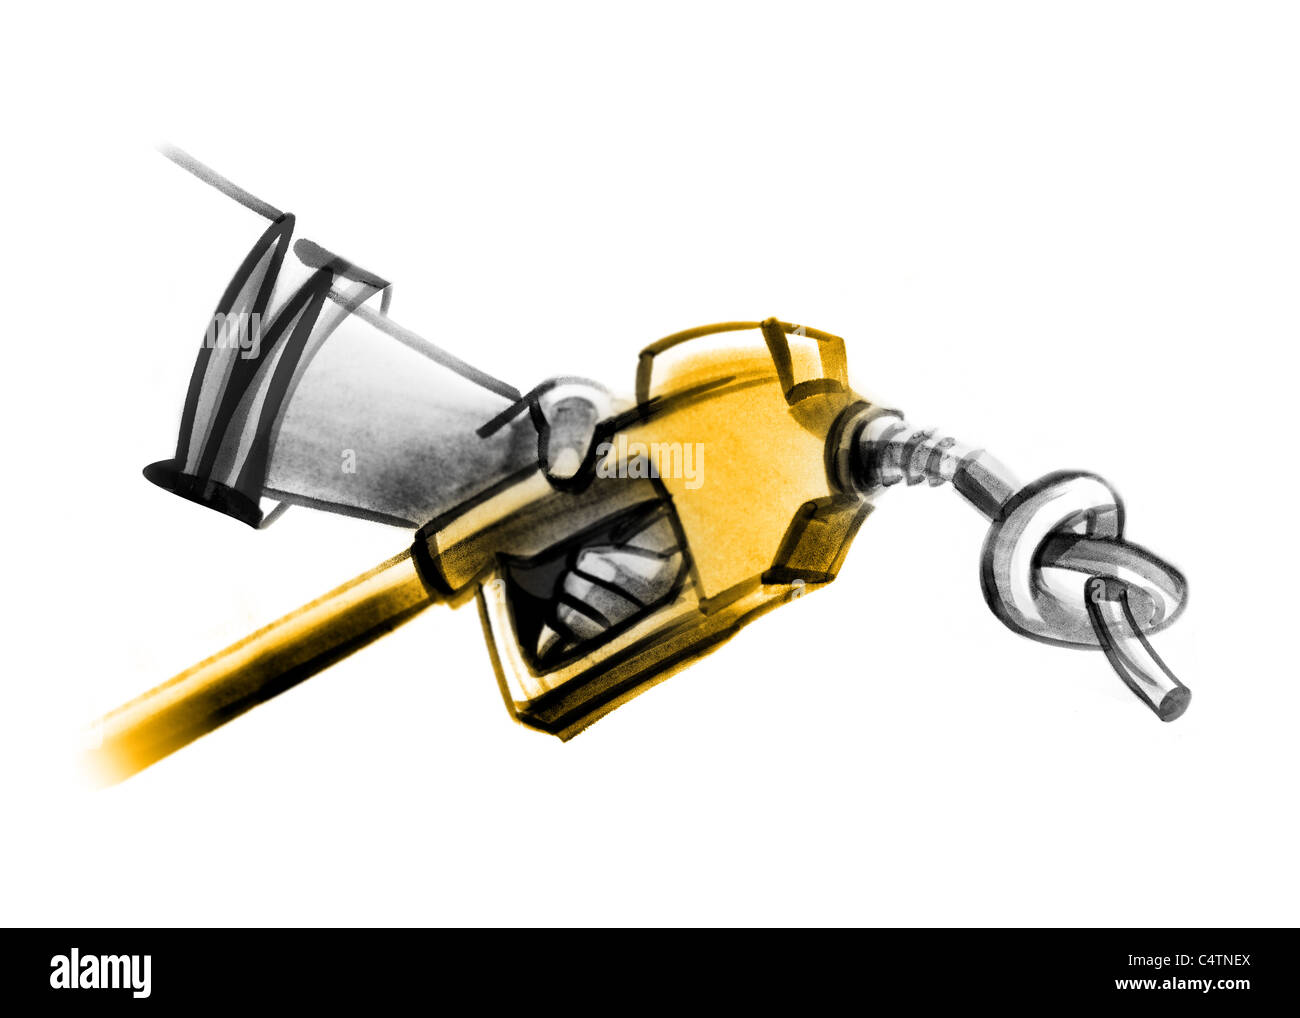 Gas pump nozzle with tied knot Stock Photo